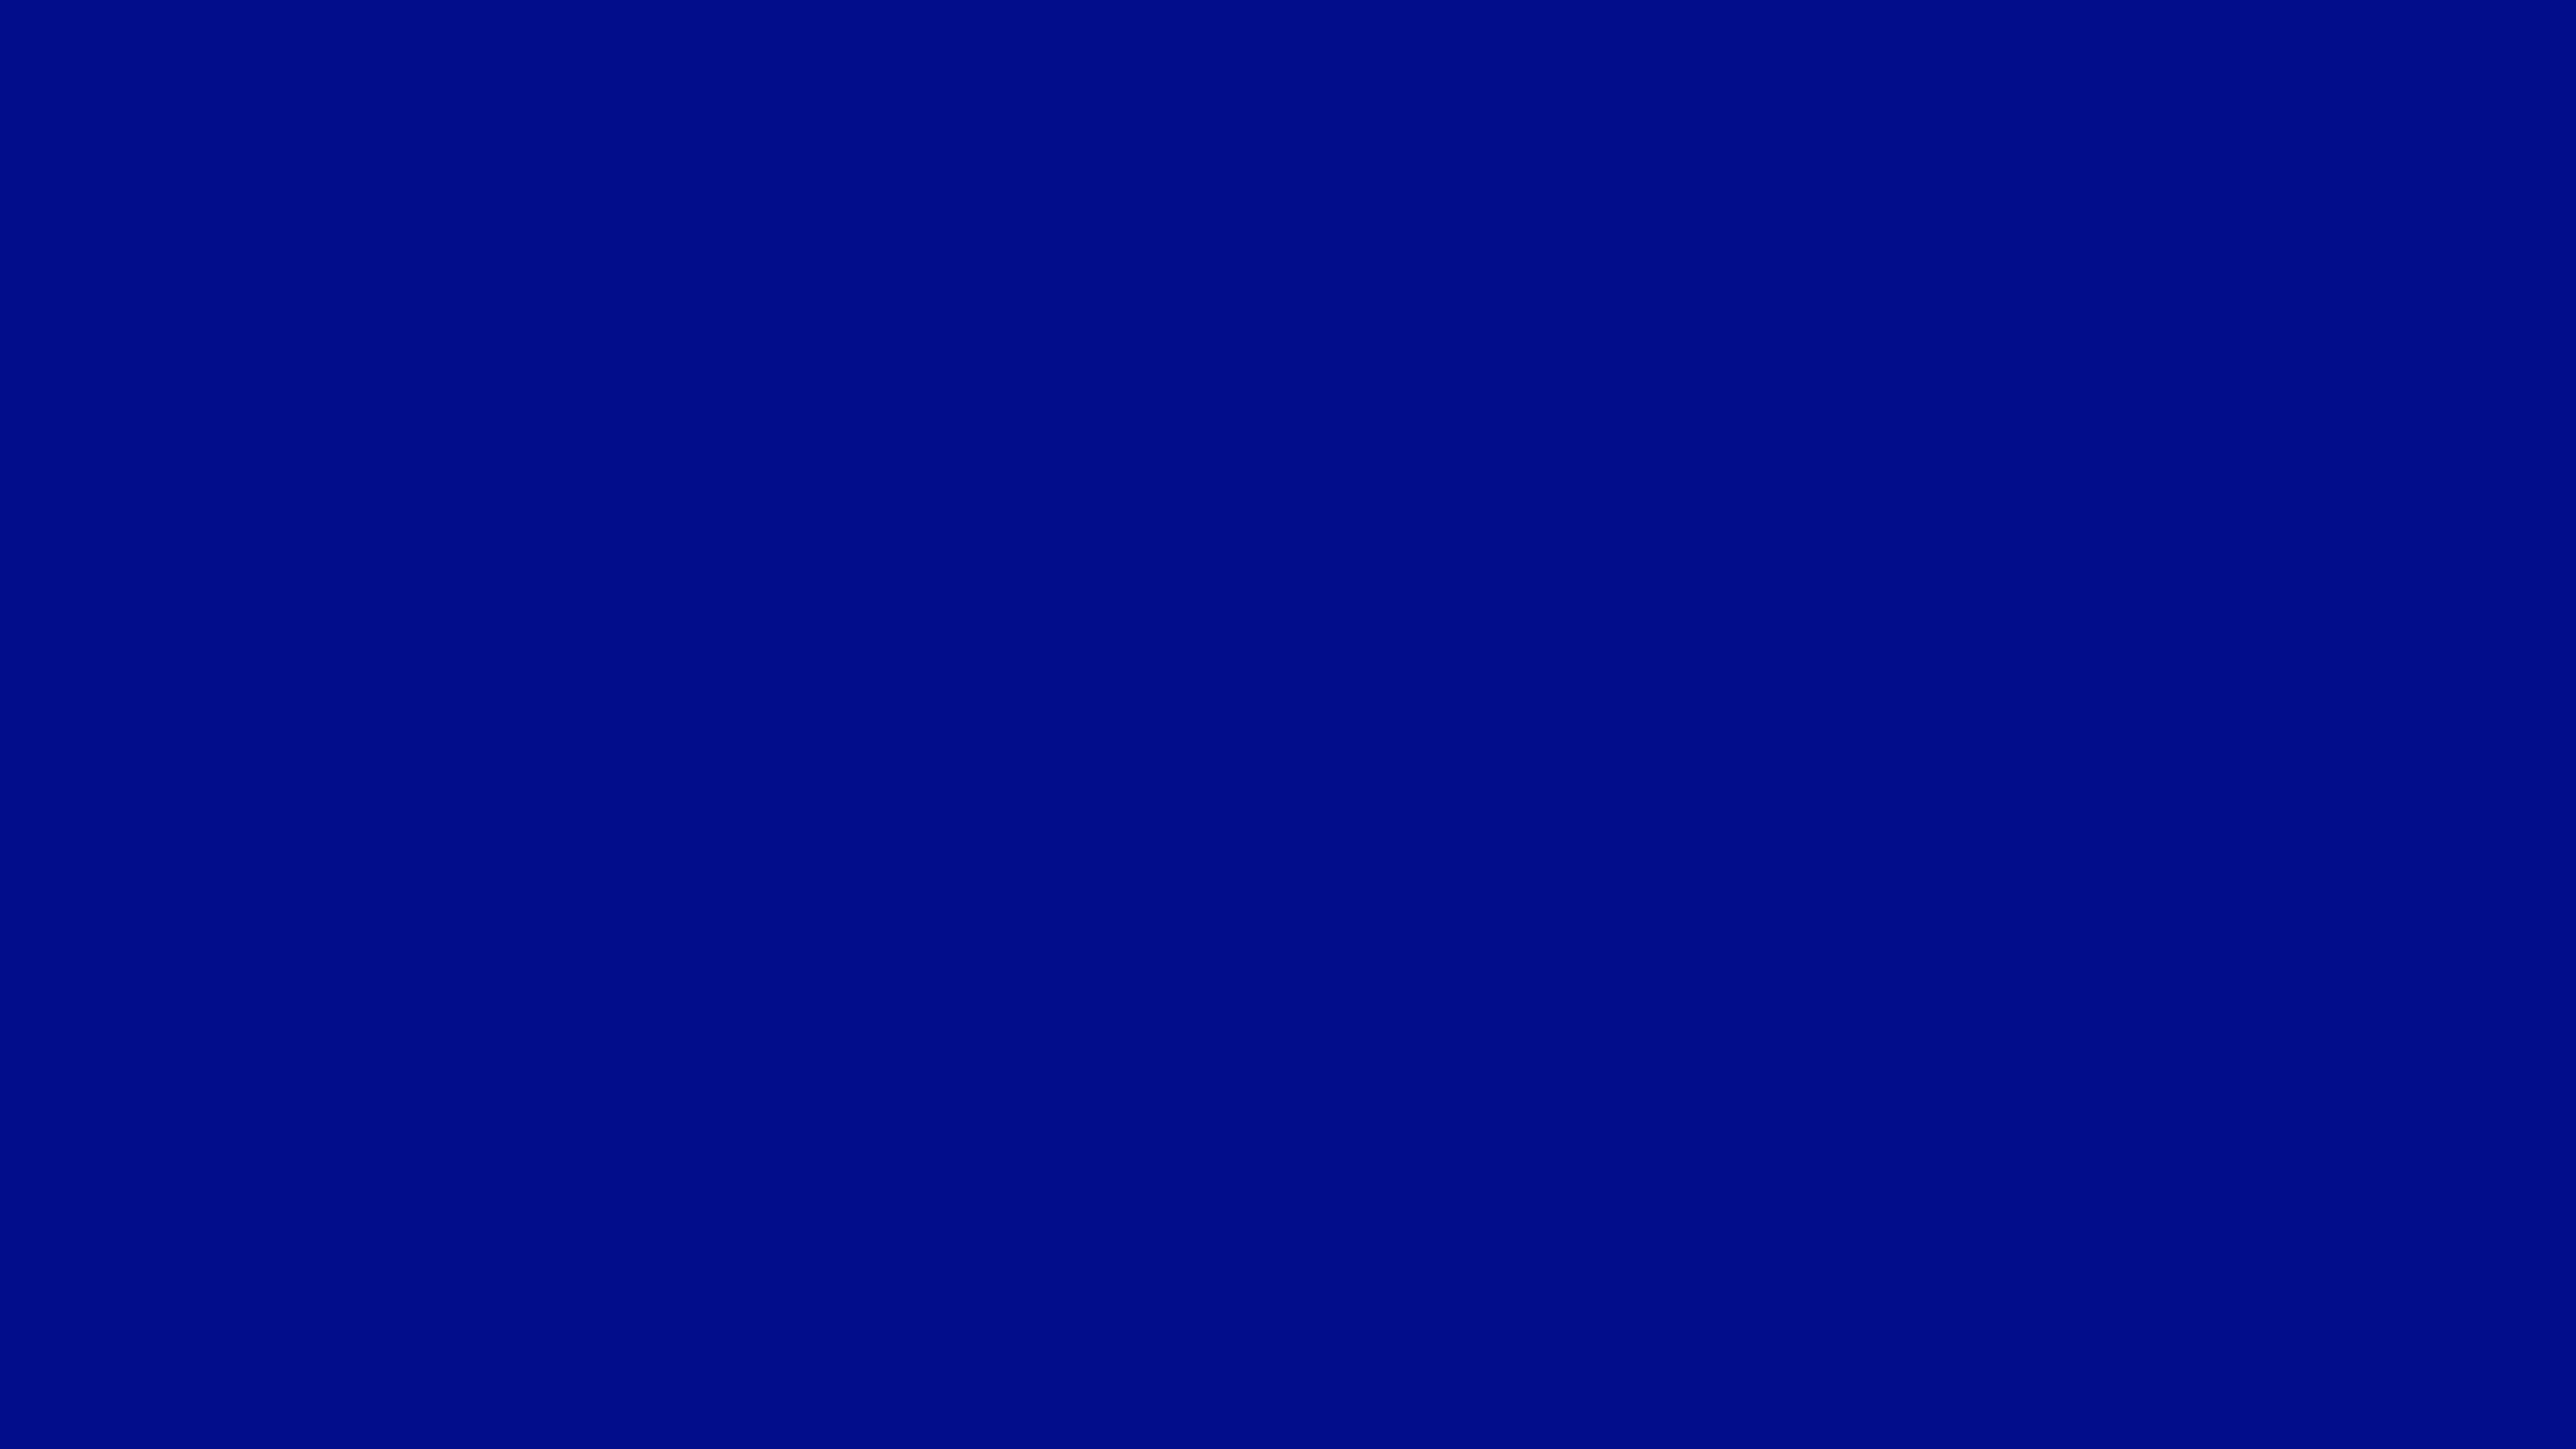 7680x4320 Phthalo Blue Solid Color Background